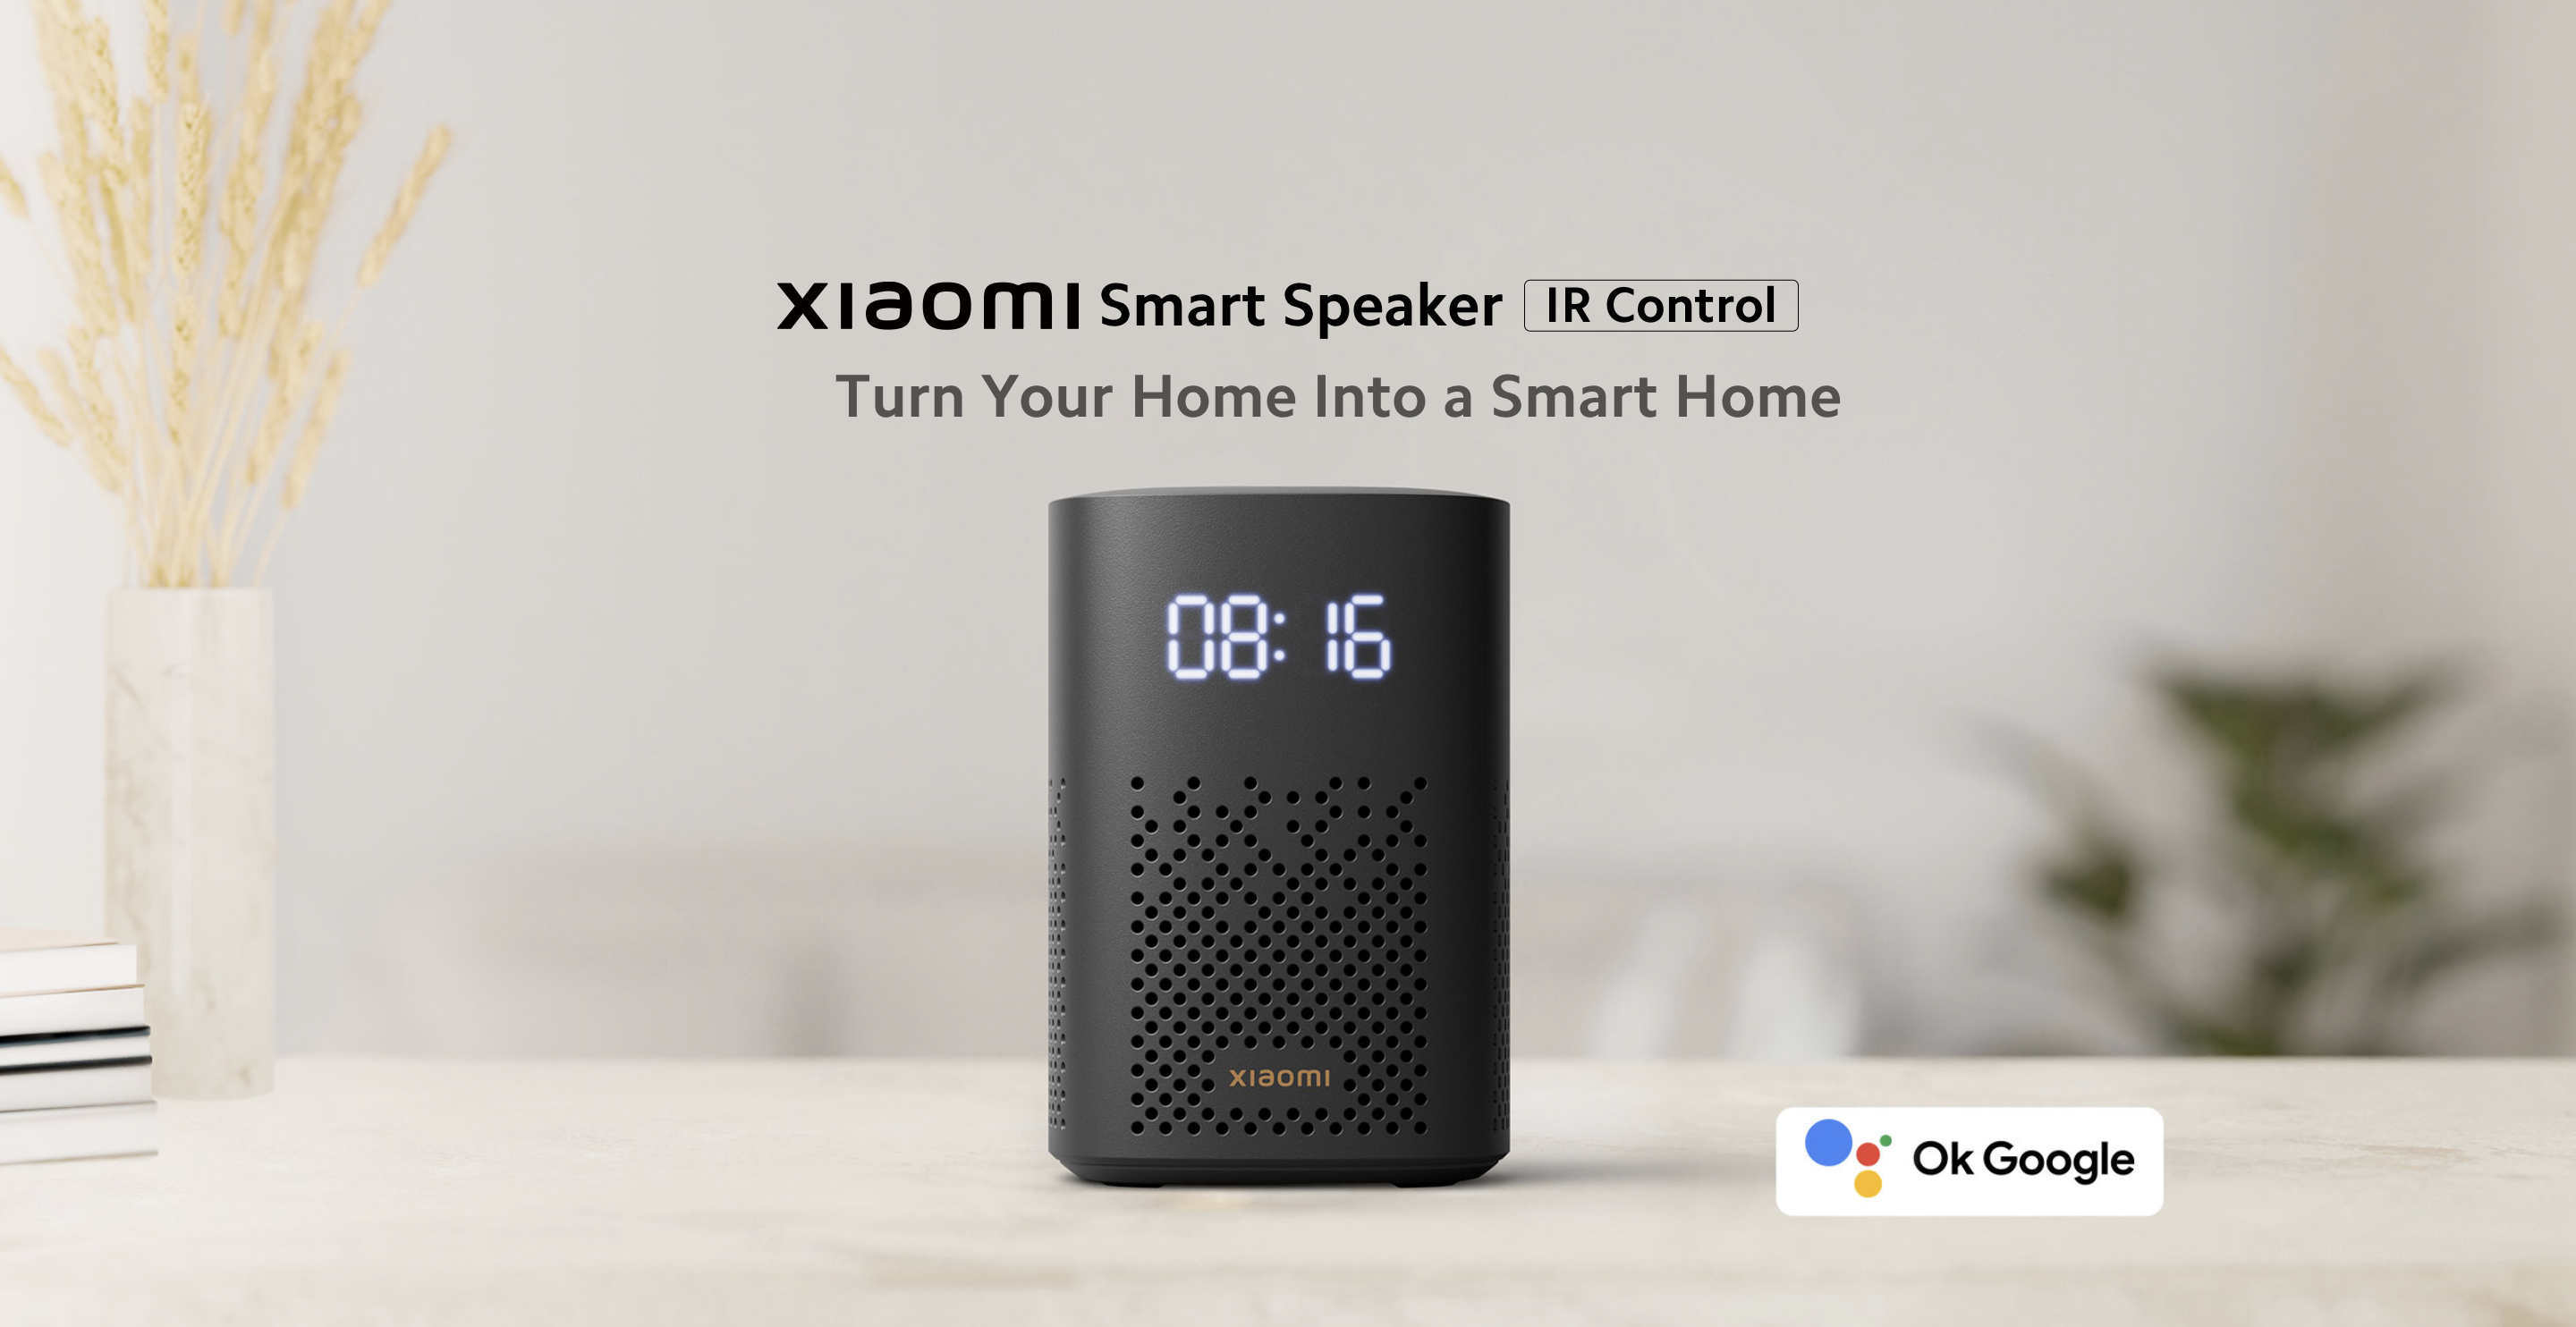 Xiaomi Smart Speaker: with LED screen, IR sensor to control your appliances, Google Assistant and Chromecast support for $63